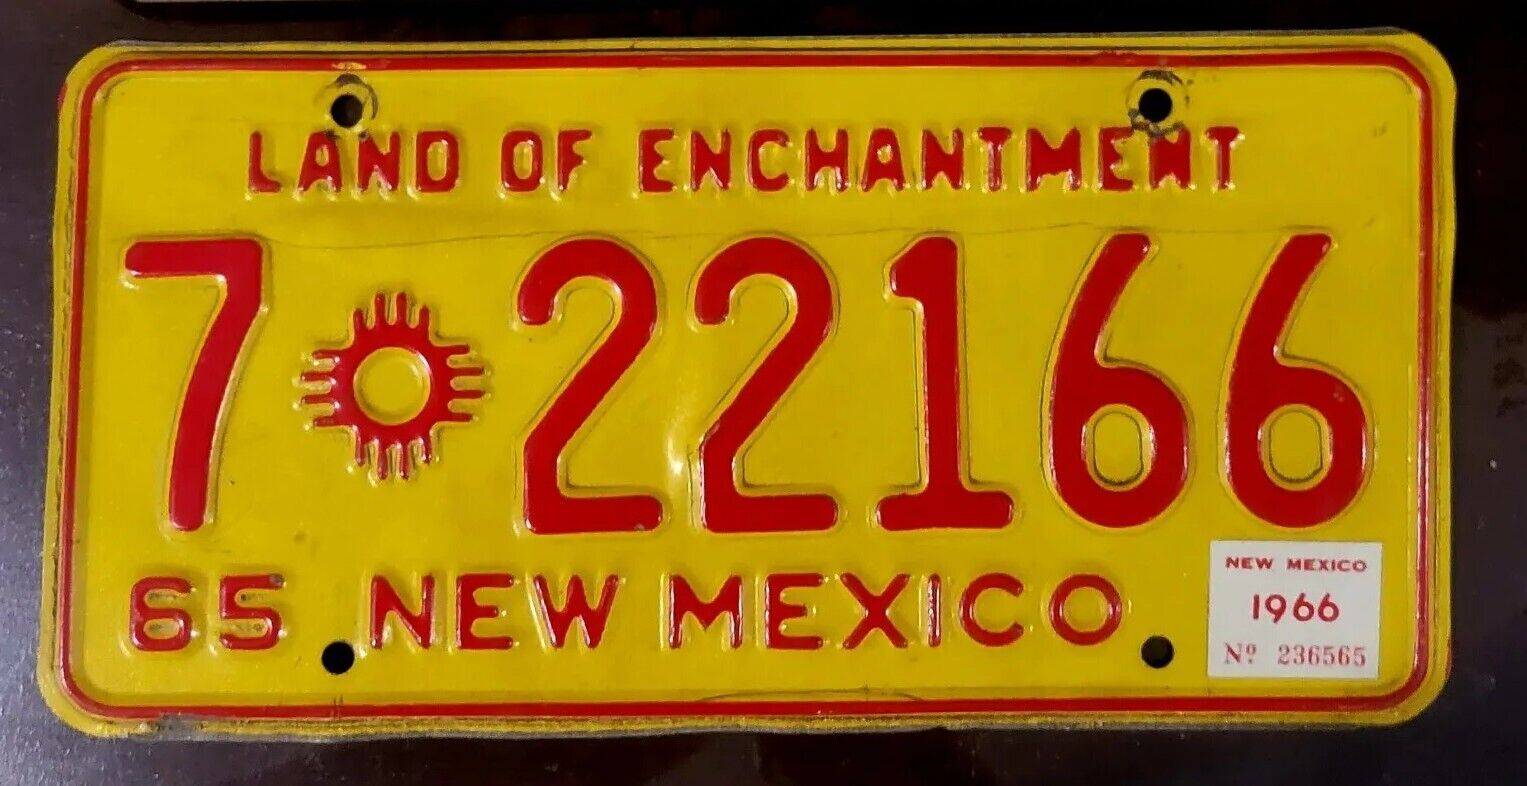  1965 New Mexico Vintage License Plate Land Of Enchantment